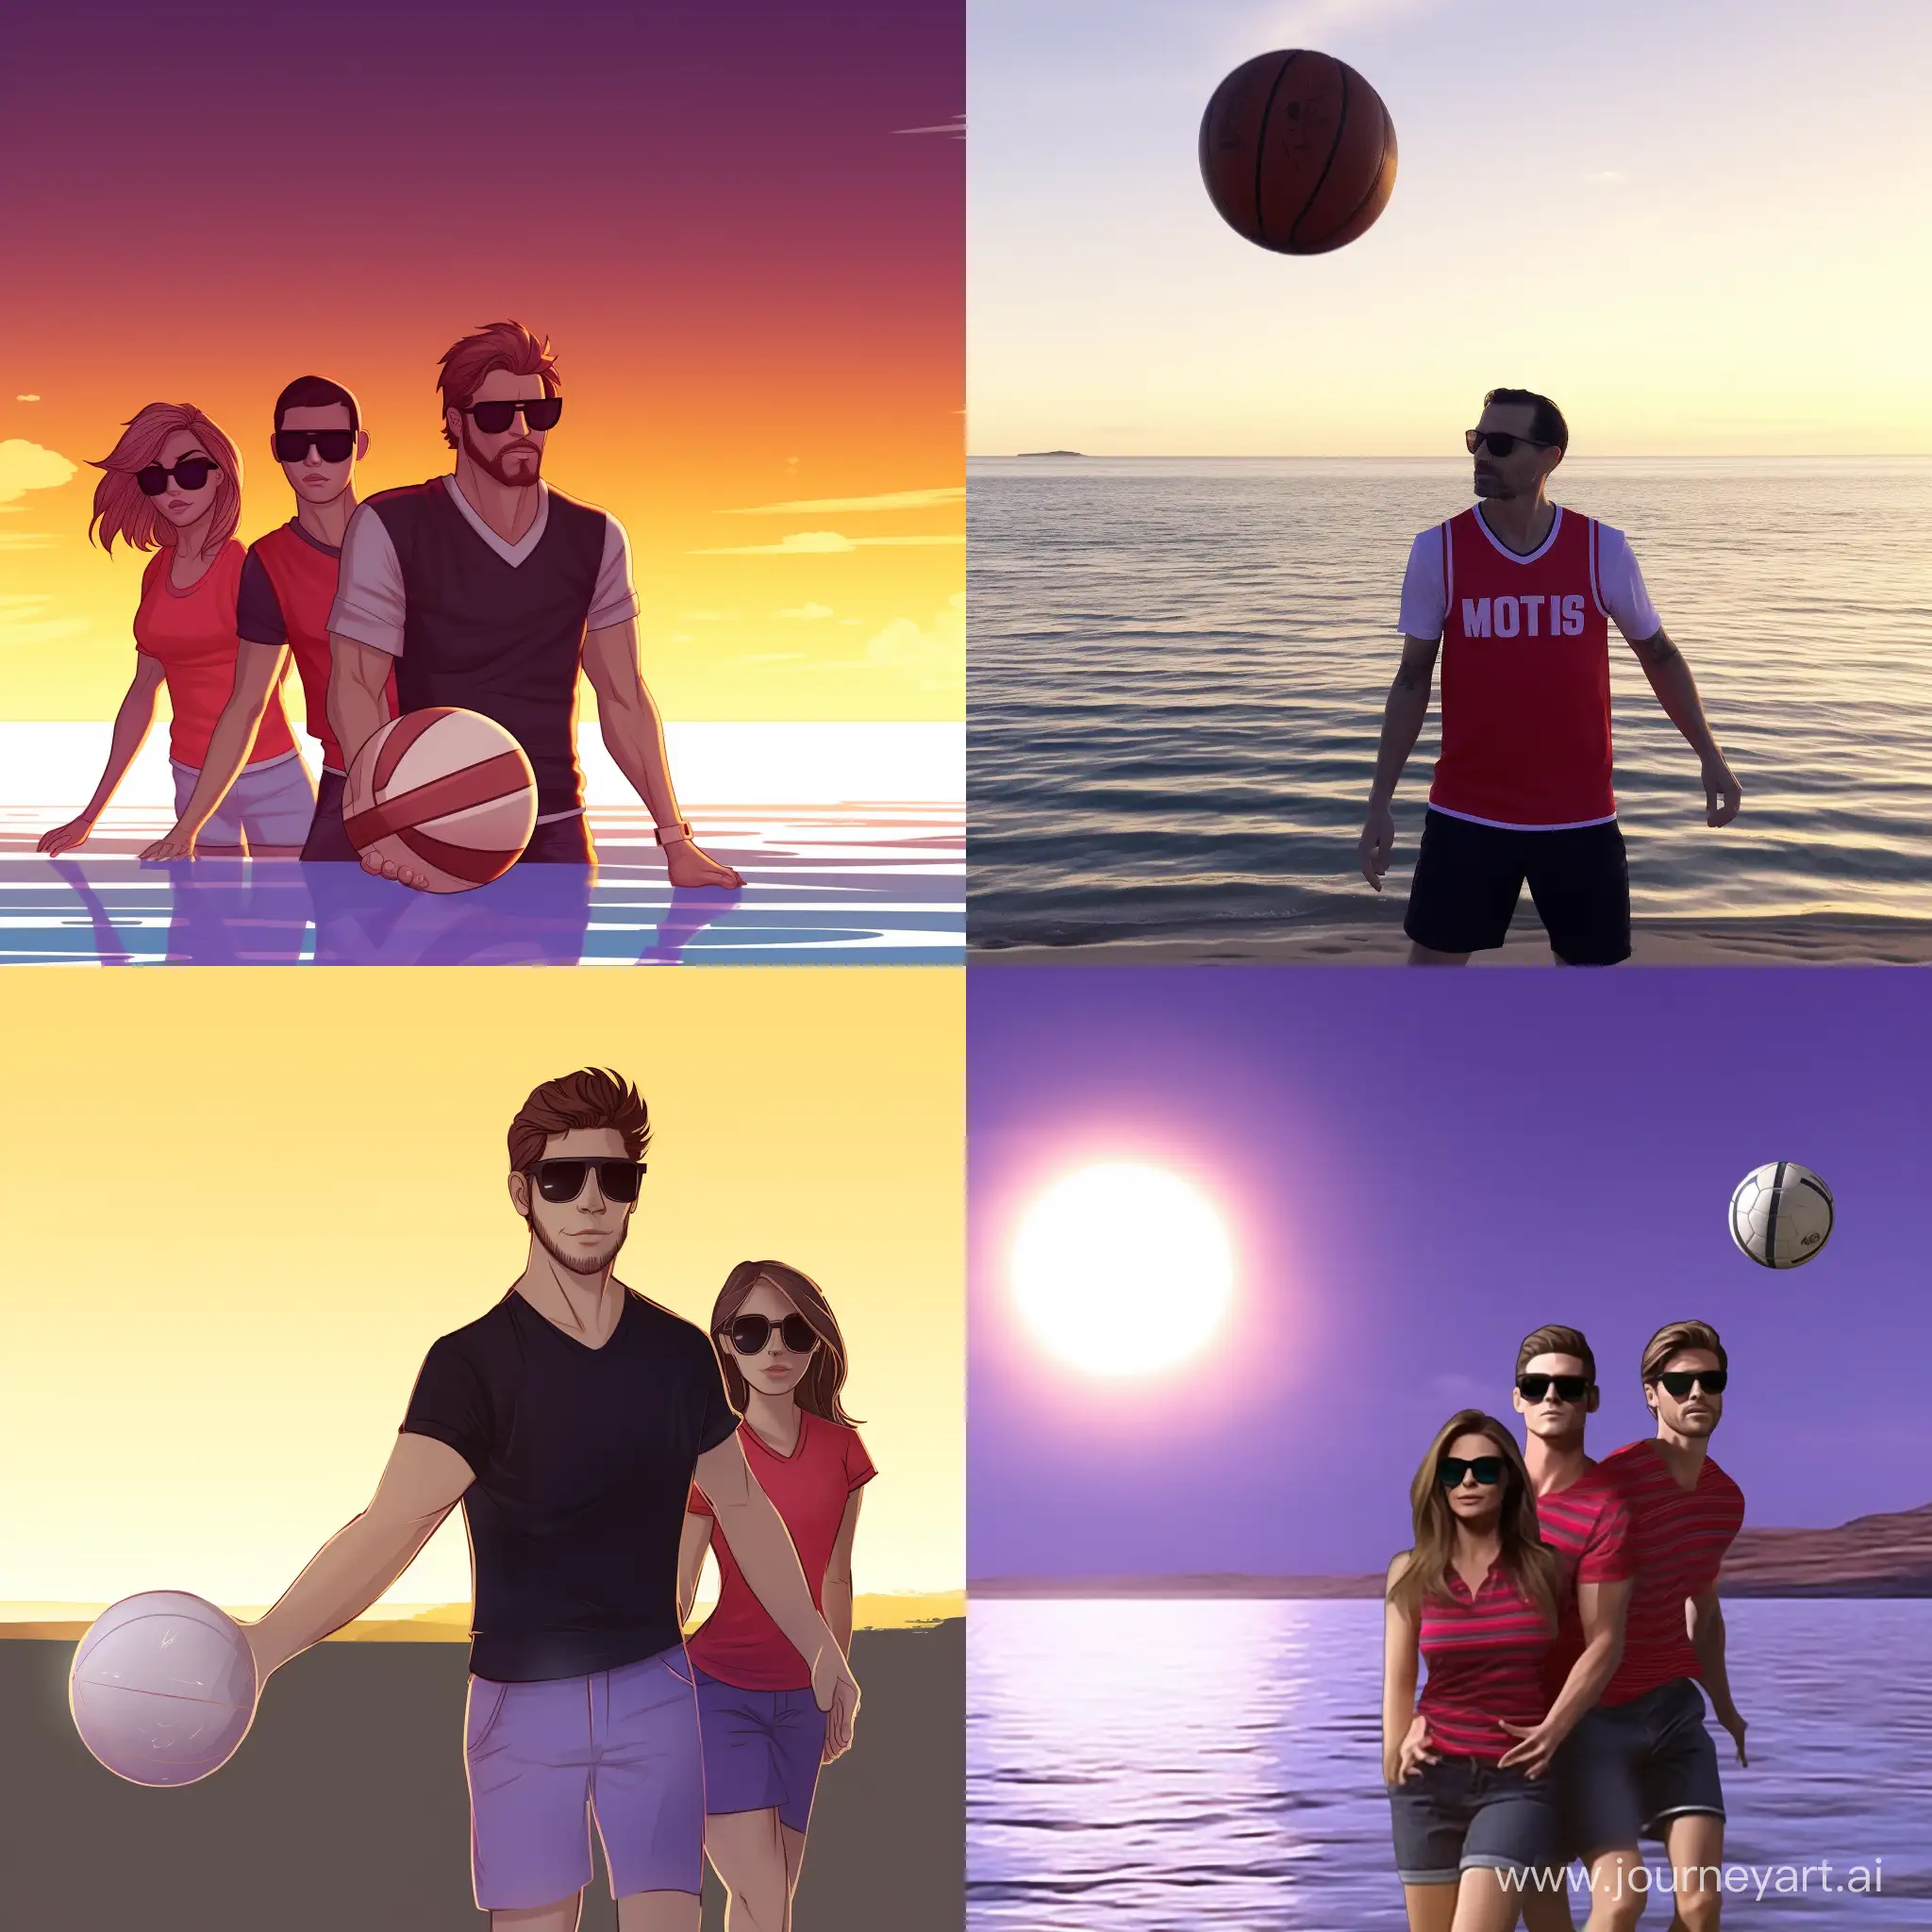 group photo of four people thee guys in a red neon undershirt and one brunet girl in a purple top use sunglasses and sport shirt, standing on the beach against the backgroung of the sea with the ball, daylight, smiling, sporty people